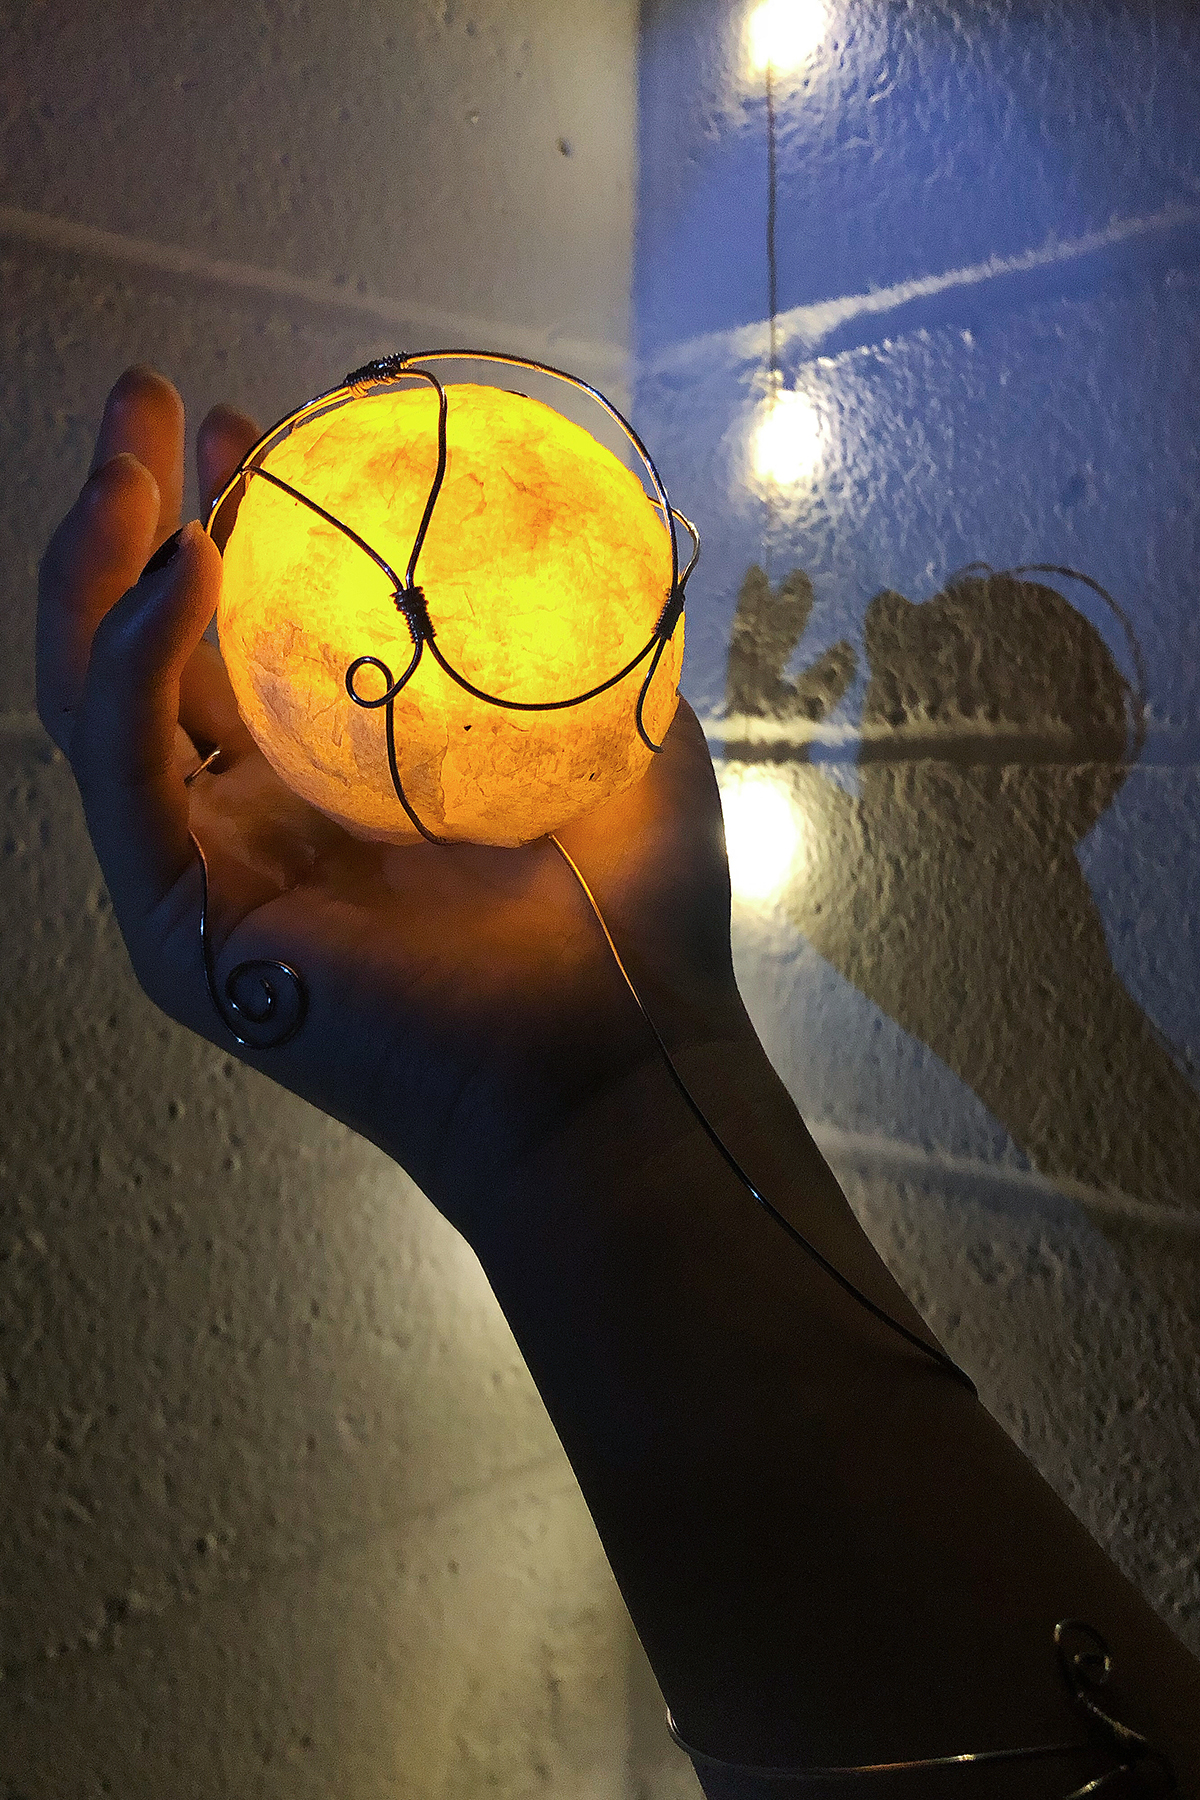 An arm holds a wired object that is lit up in a ball.